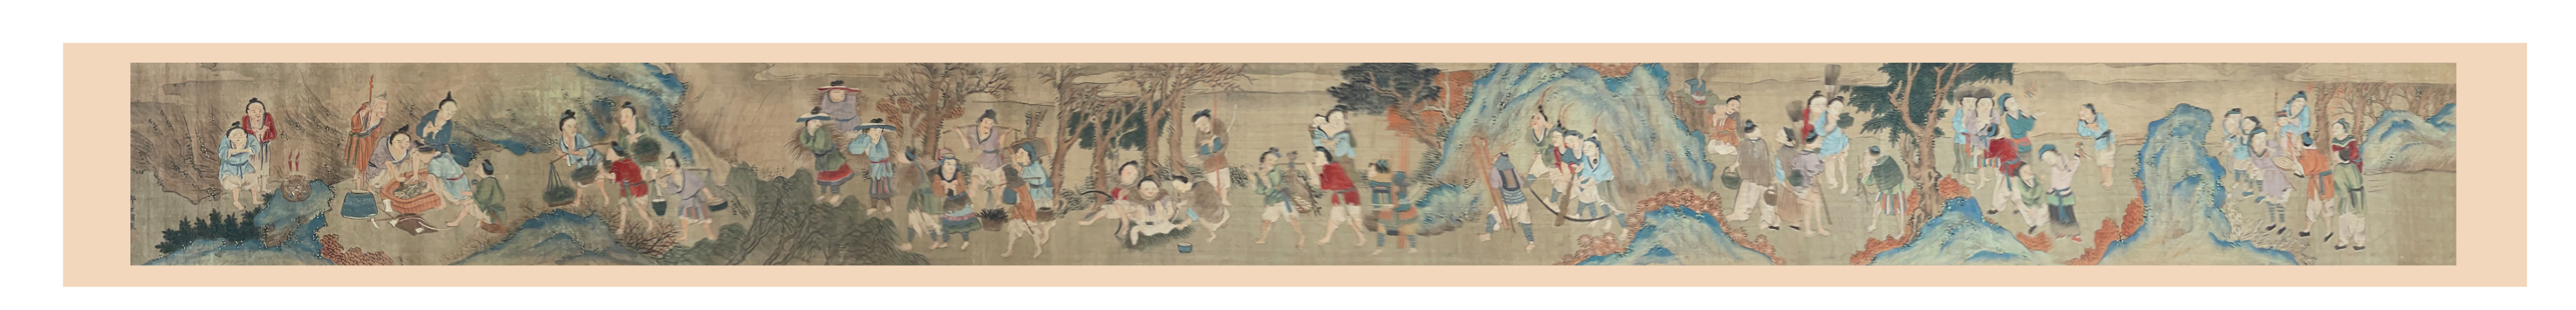 CHINESE LONG SCROLL PAINTING OF 339a35